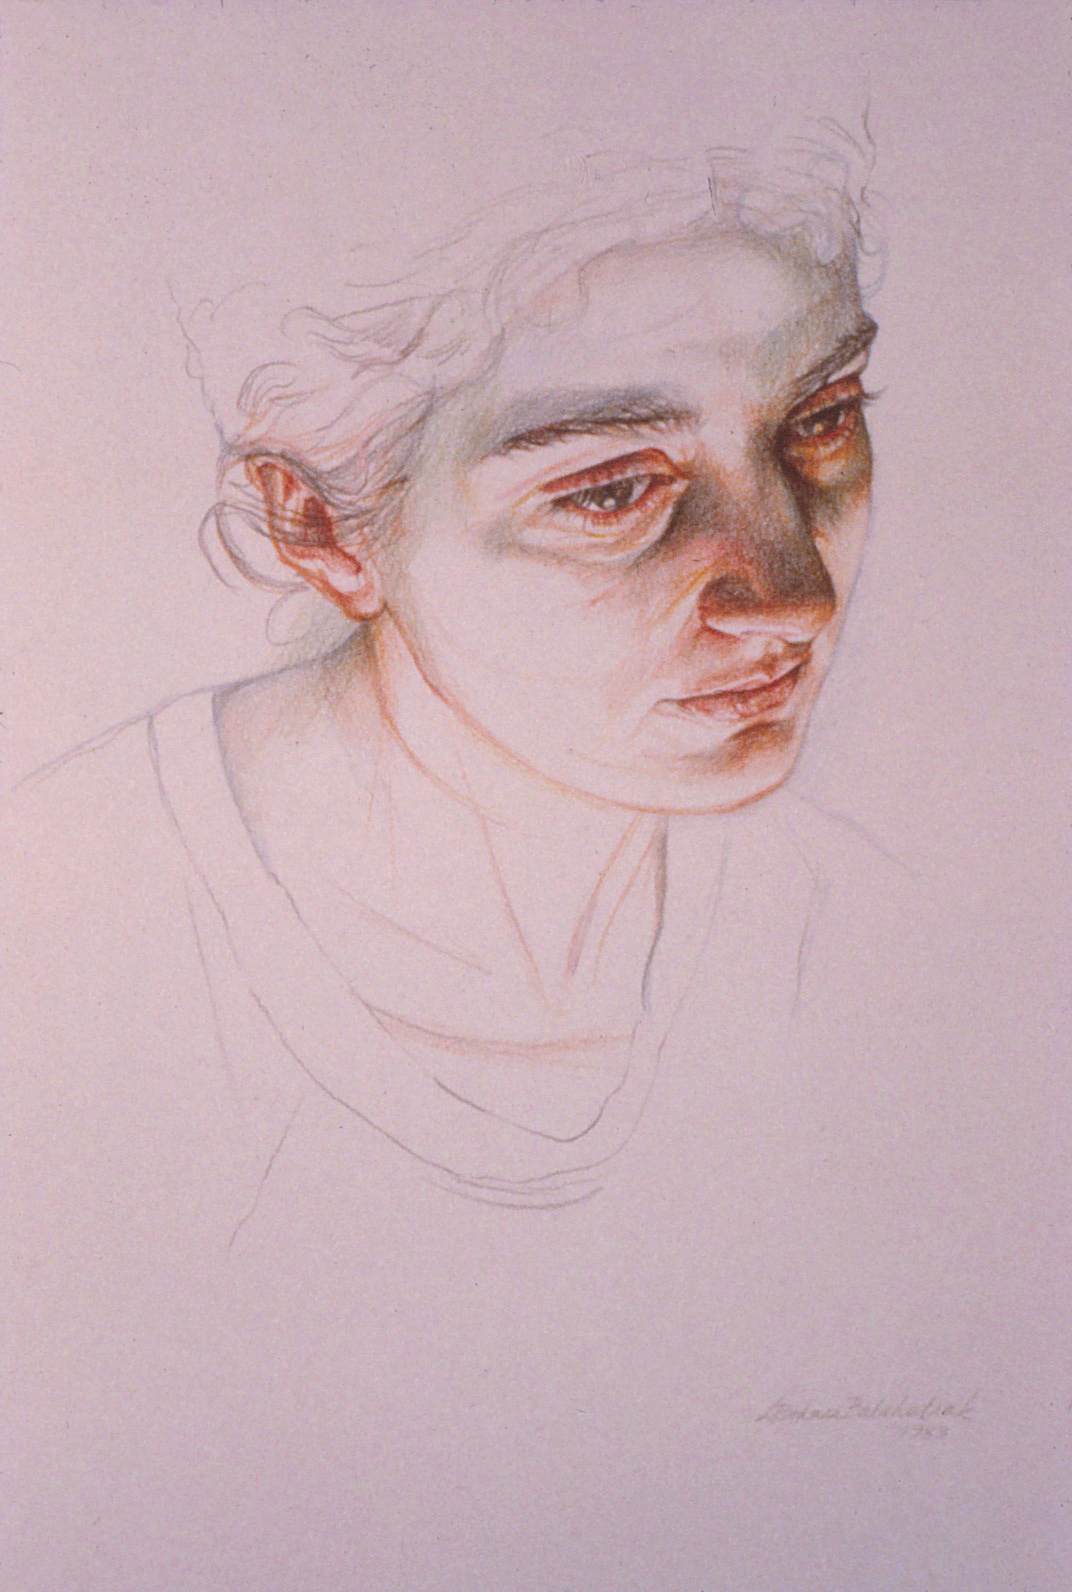 5dh(0) - Study for The Madonna Complex- color pencil on paper, 18x24 in., 1983.jpg